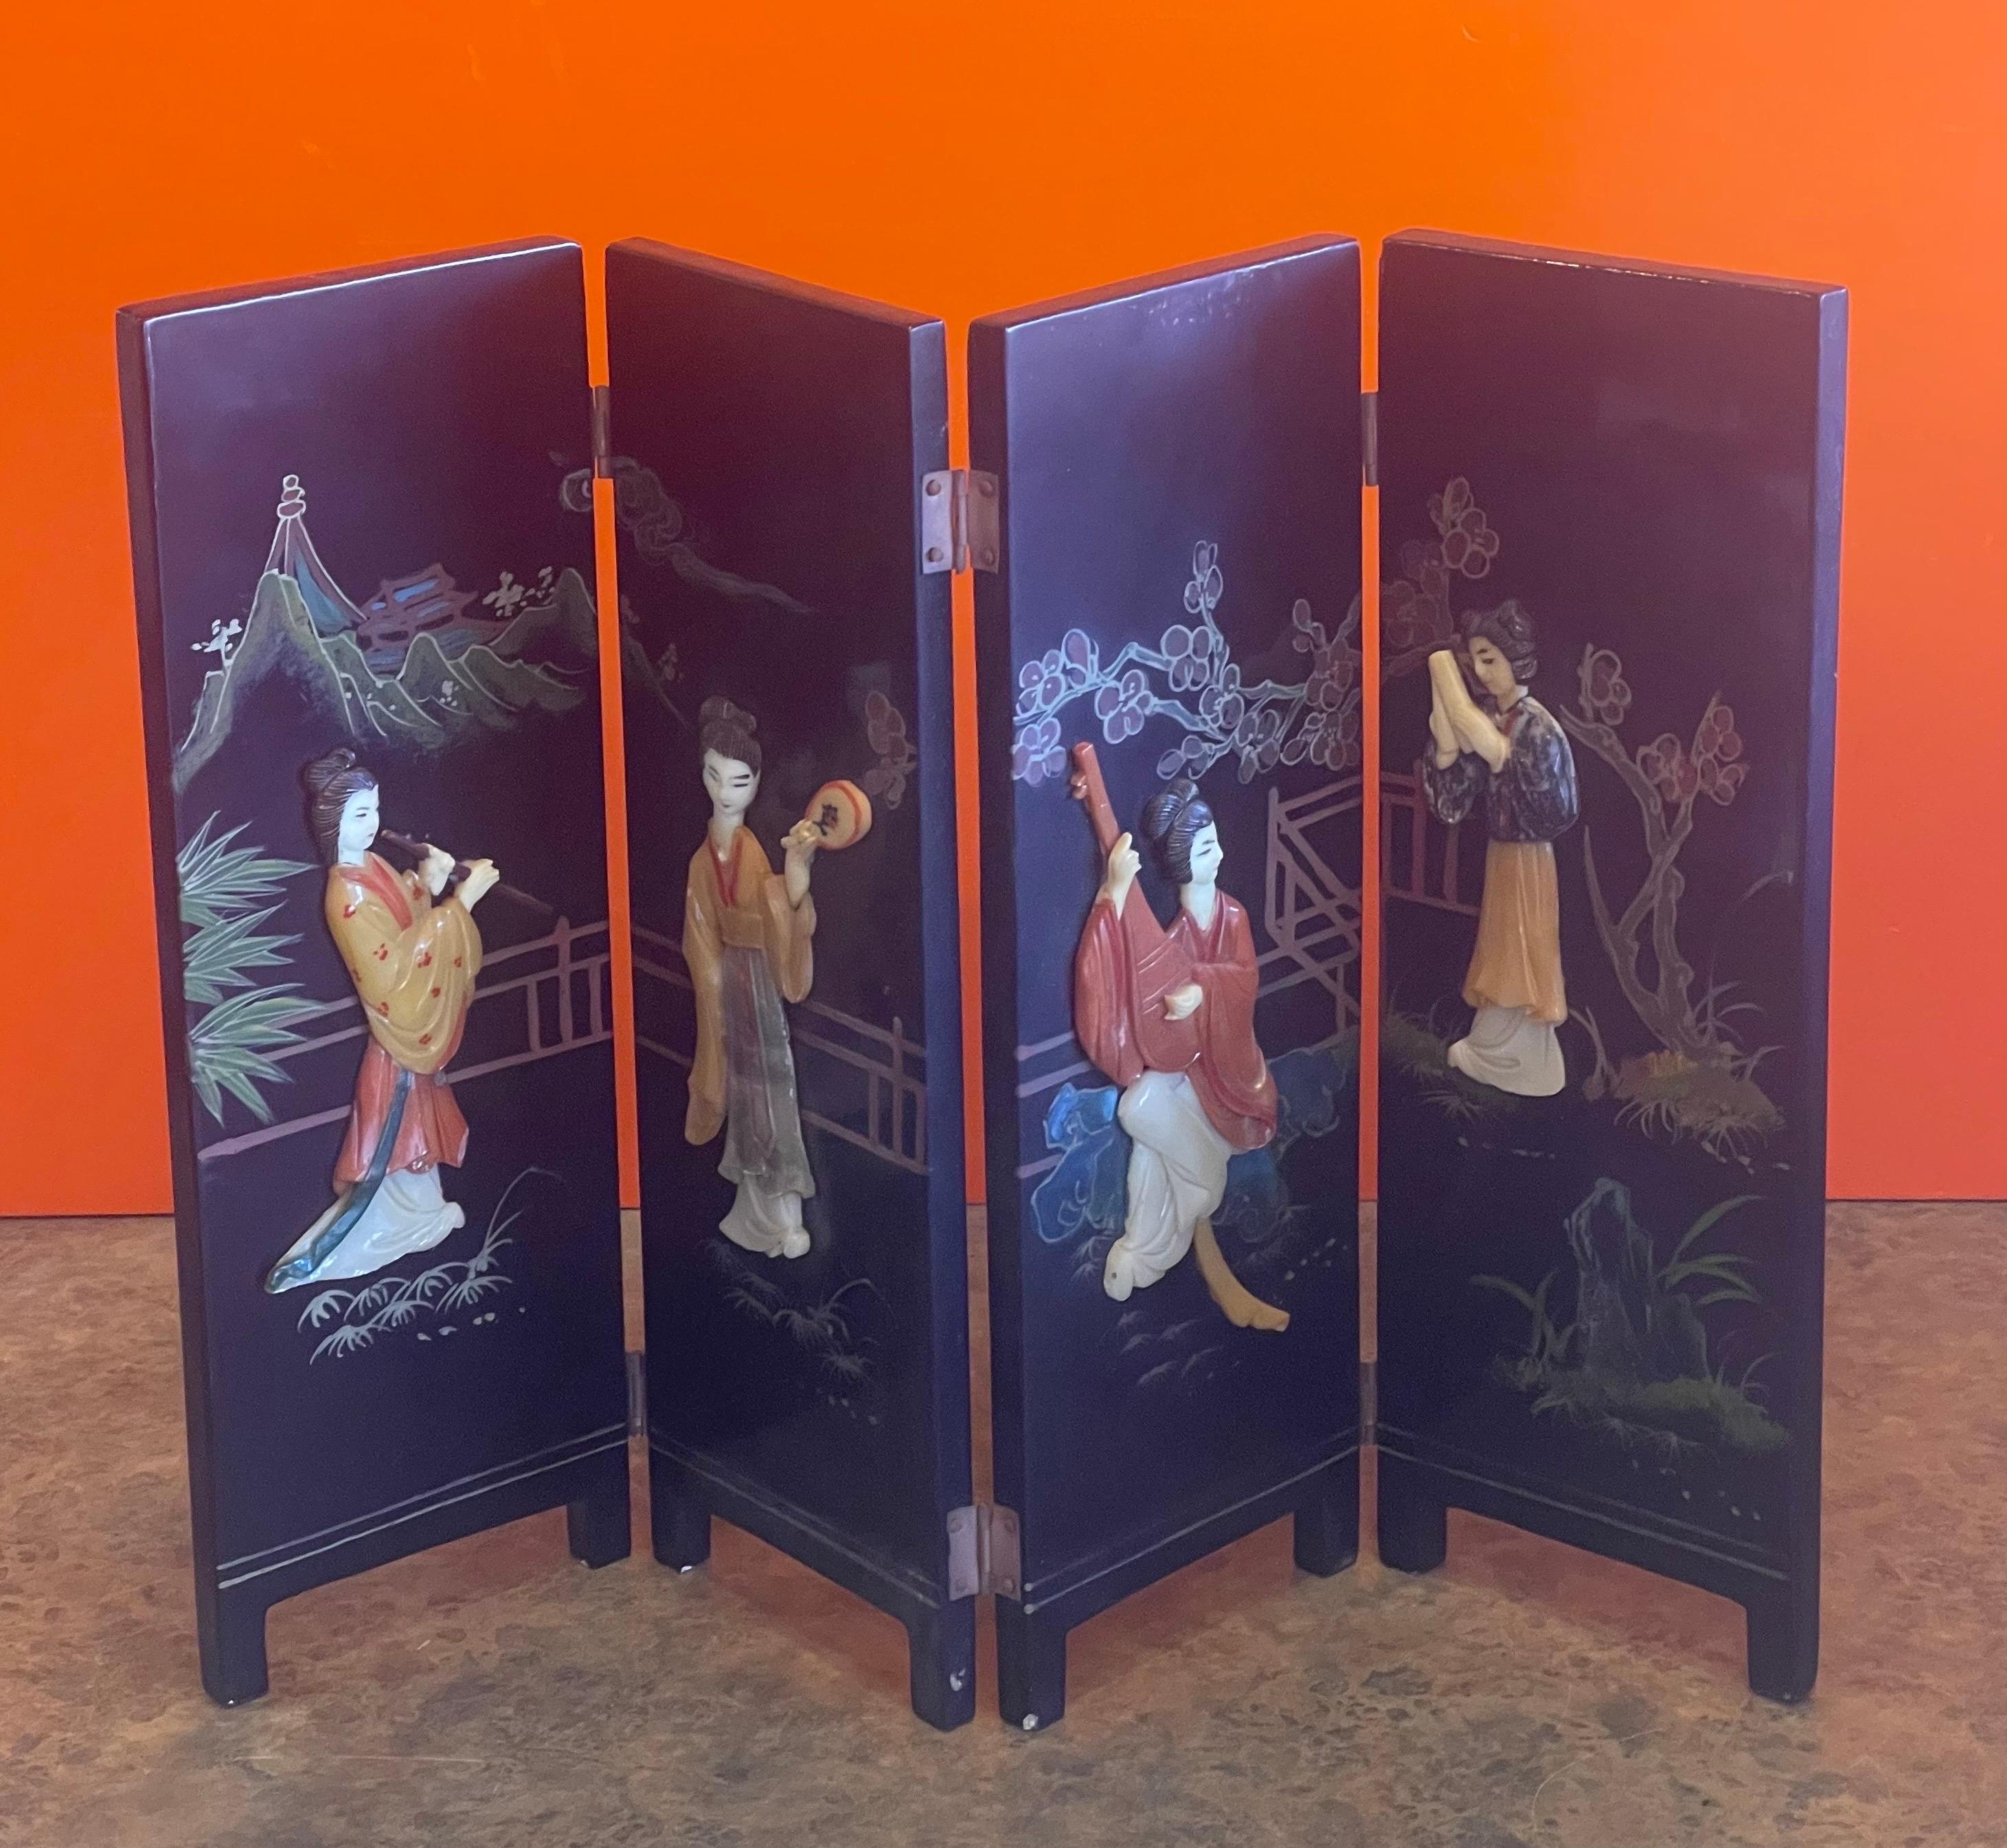 A very nice miniature four panel Asian figurine folding screen with intricate design in wood, circa 1970s. The screen is in good vintage condition and measures 14